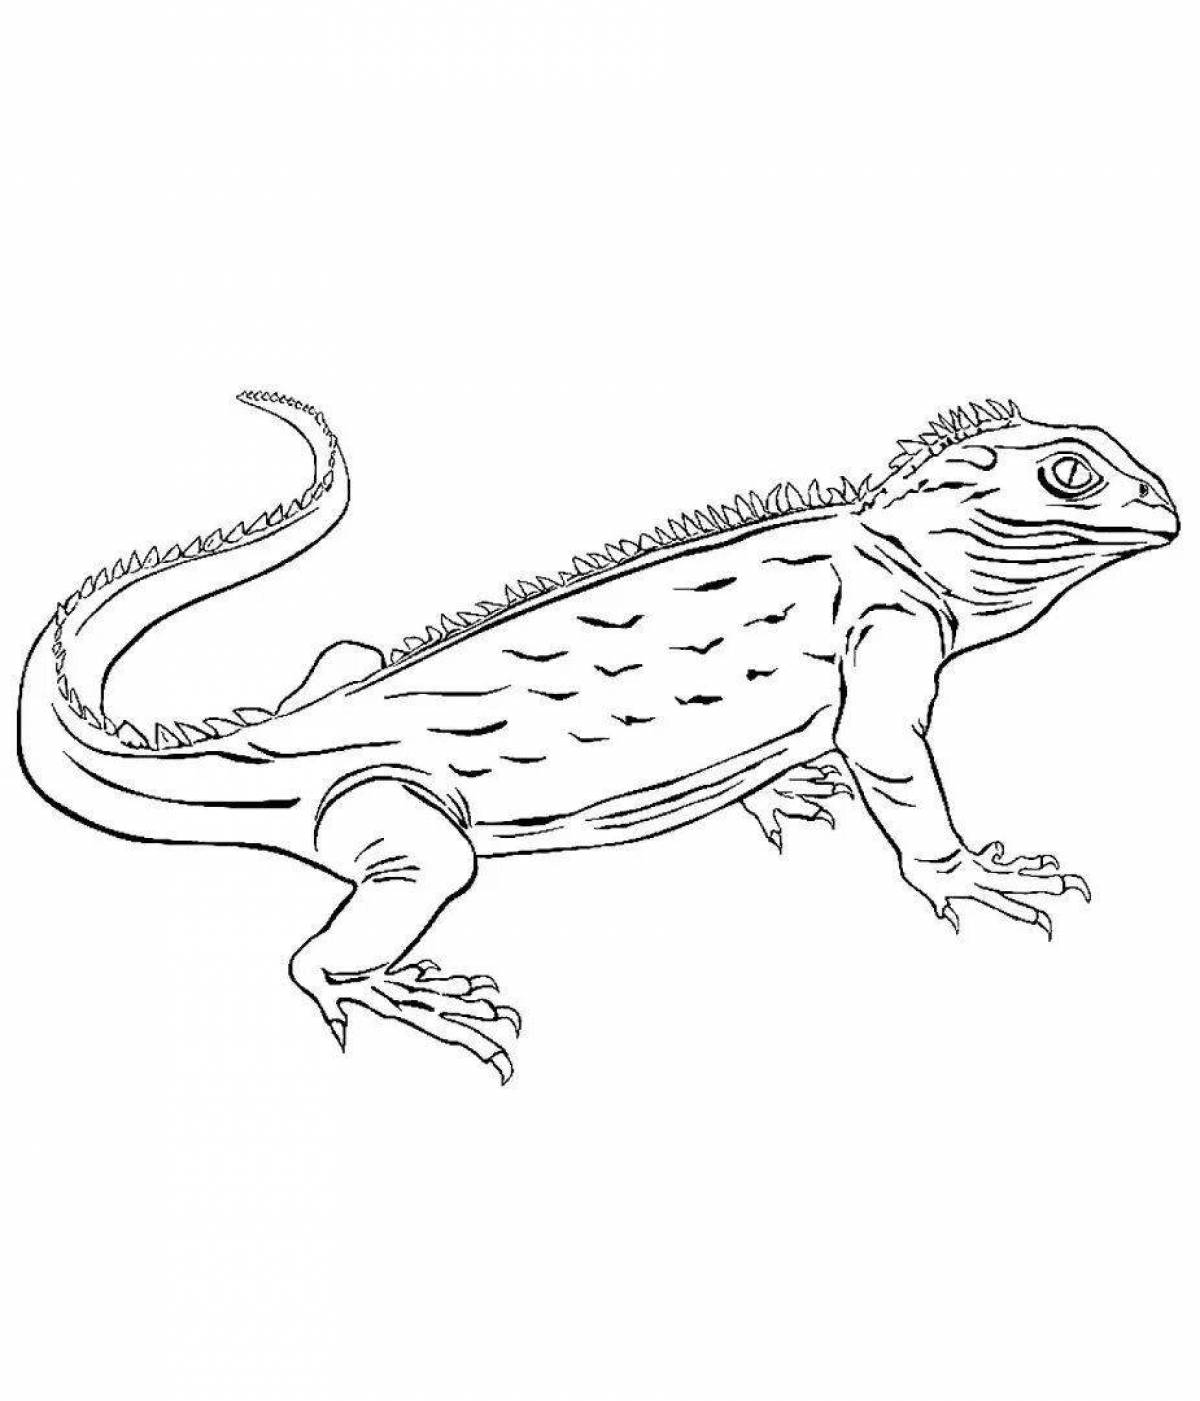 Majestic reptile coloring pages